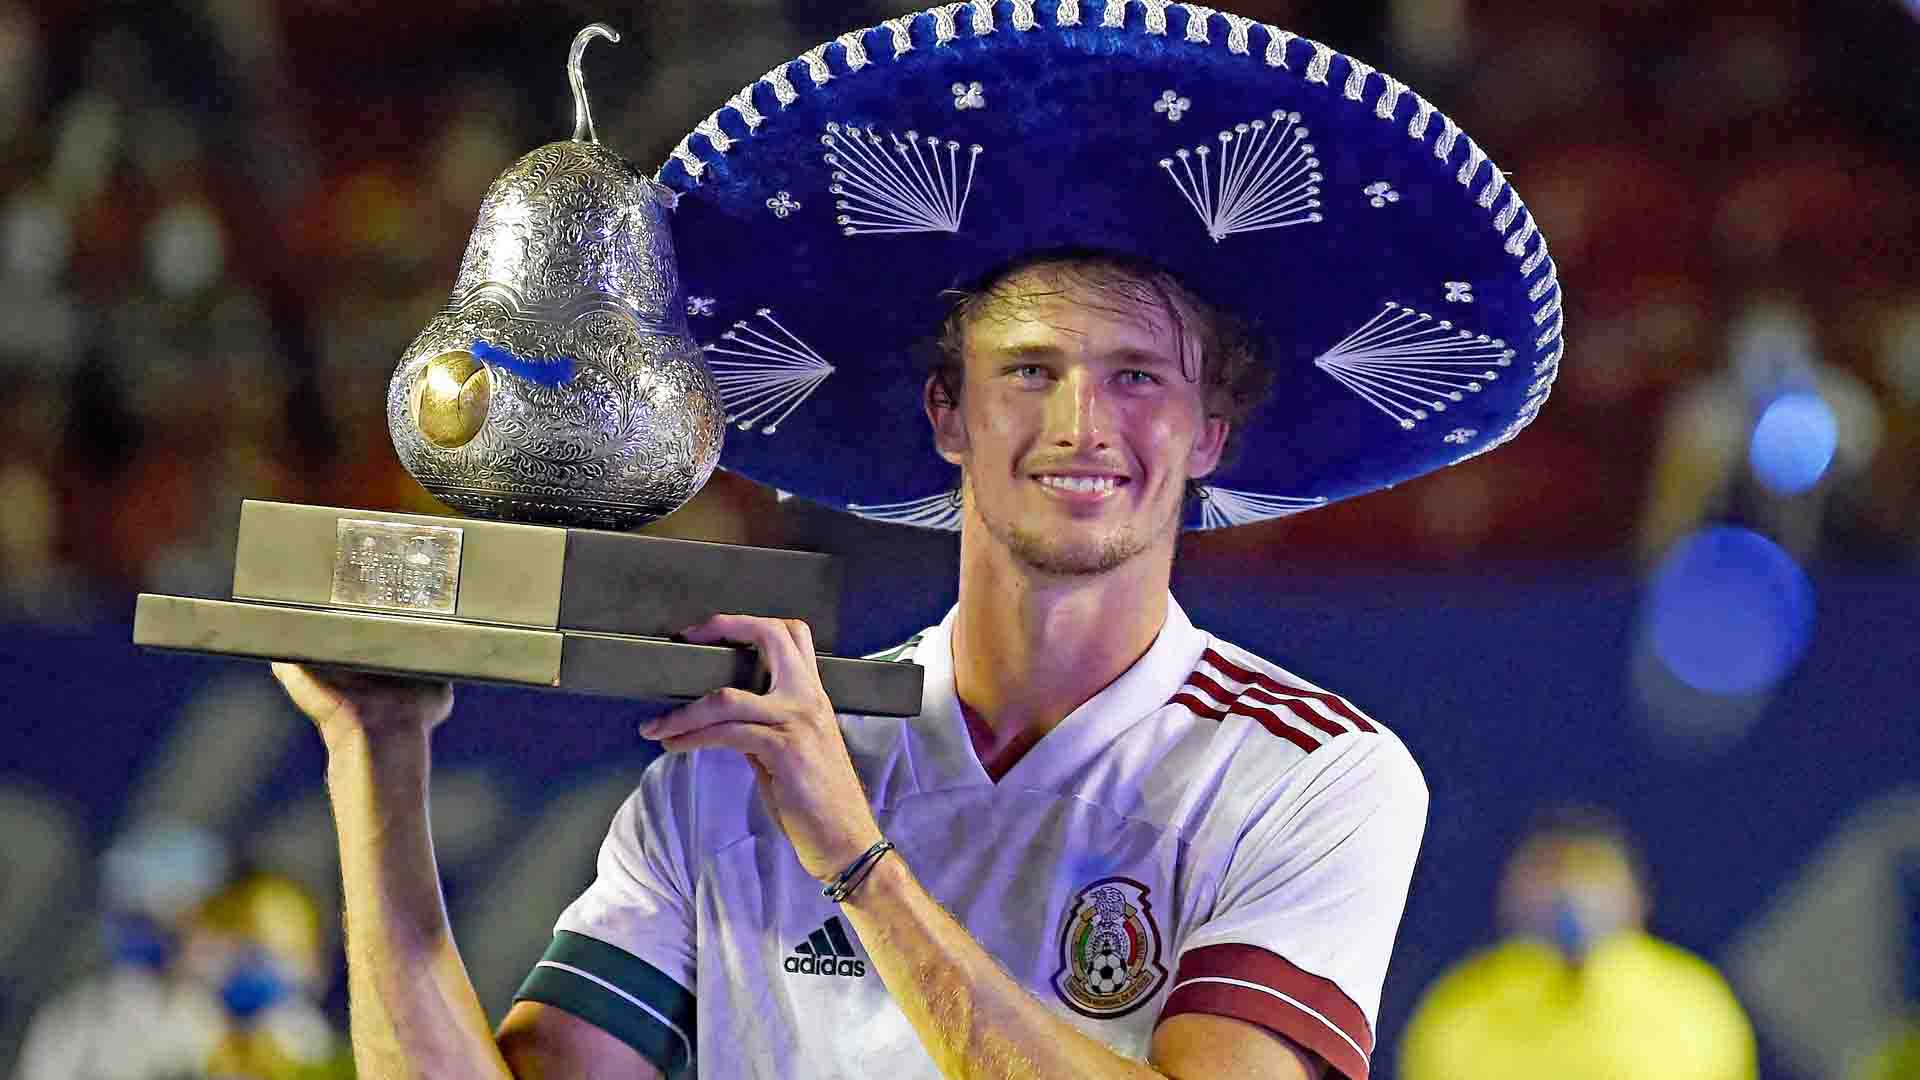 Alexander Zverev has won a tour-level title in each of the past six ATP Tour seasons (2016-'21).